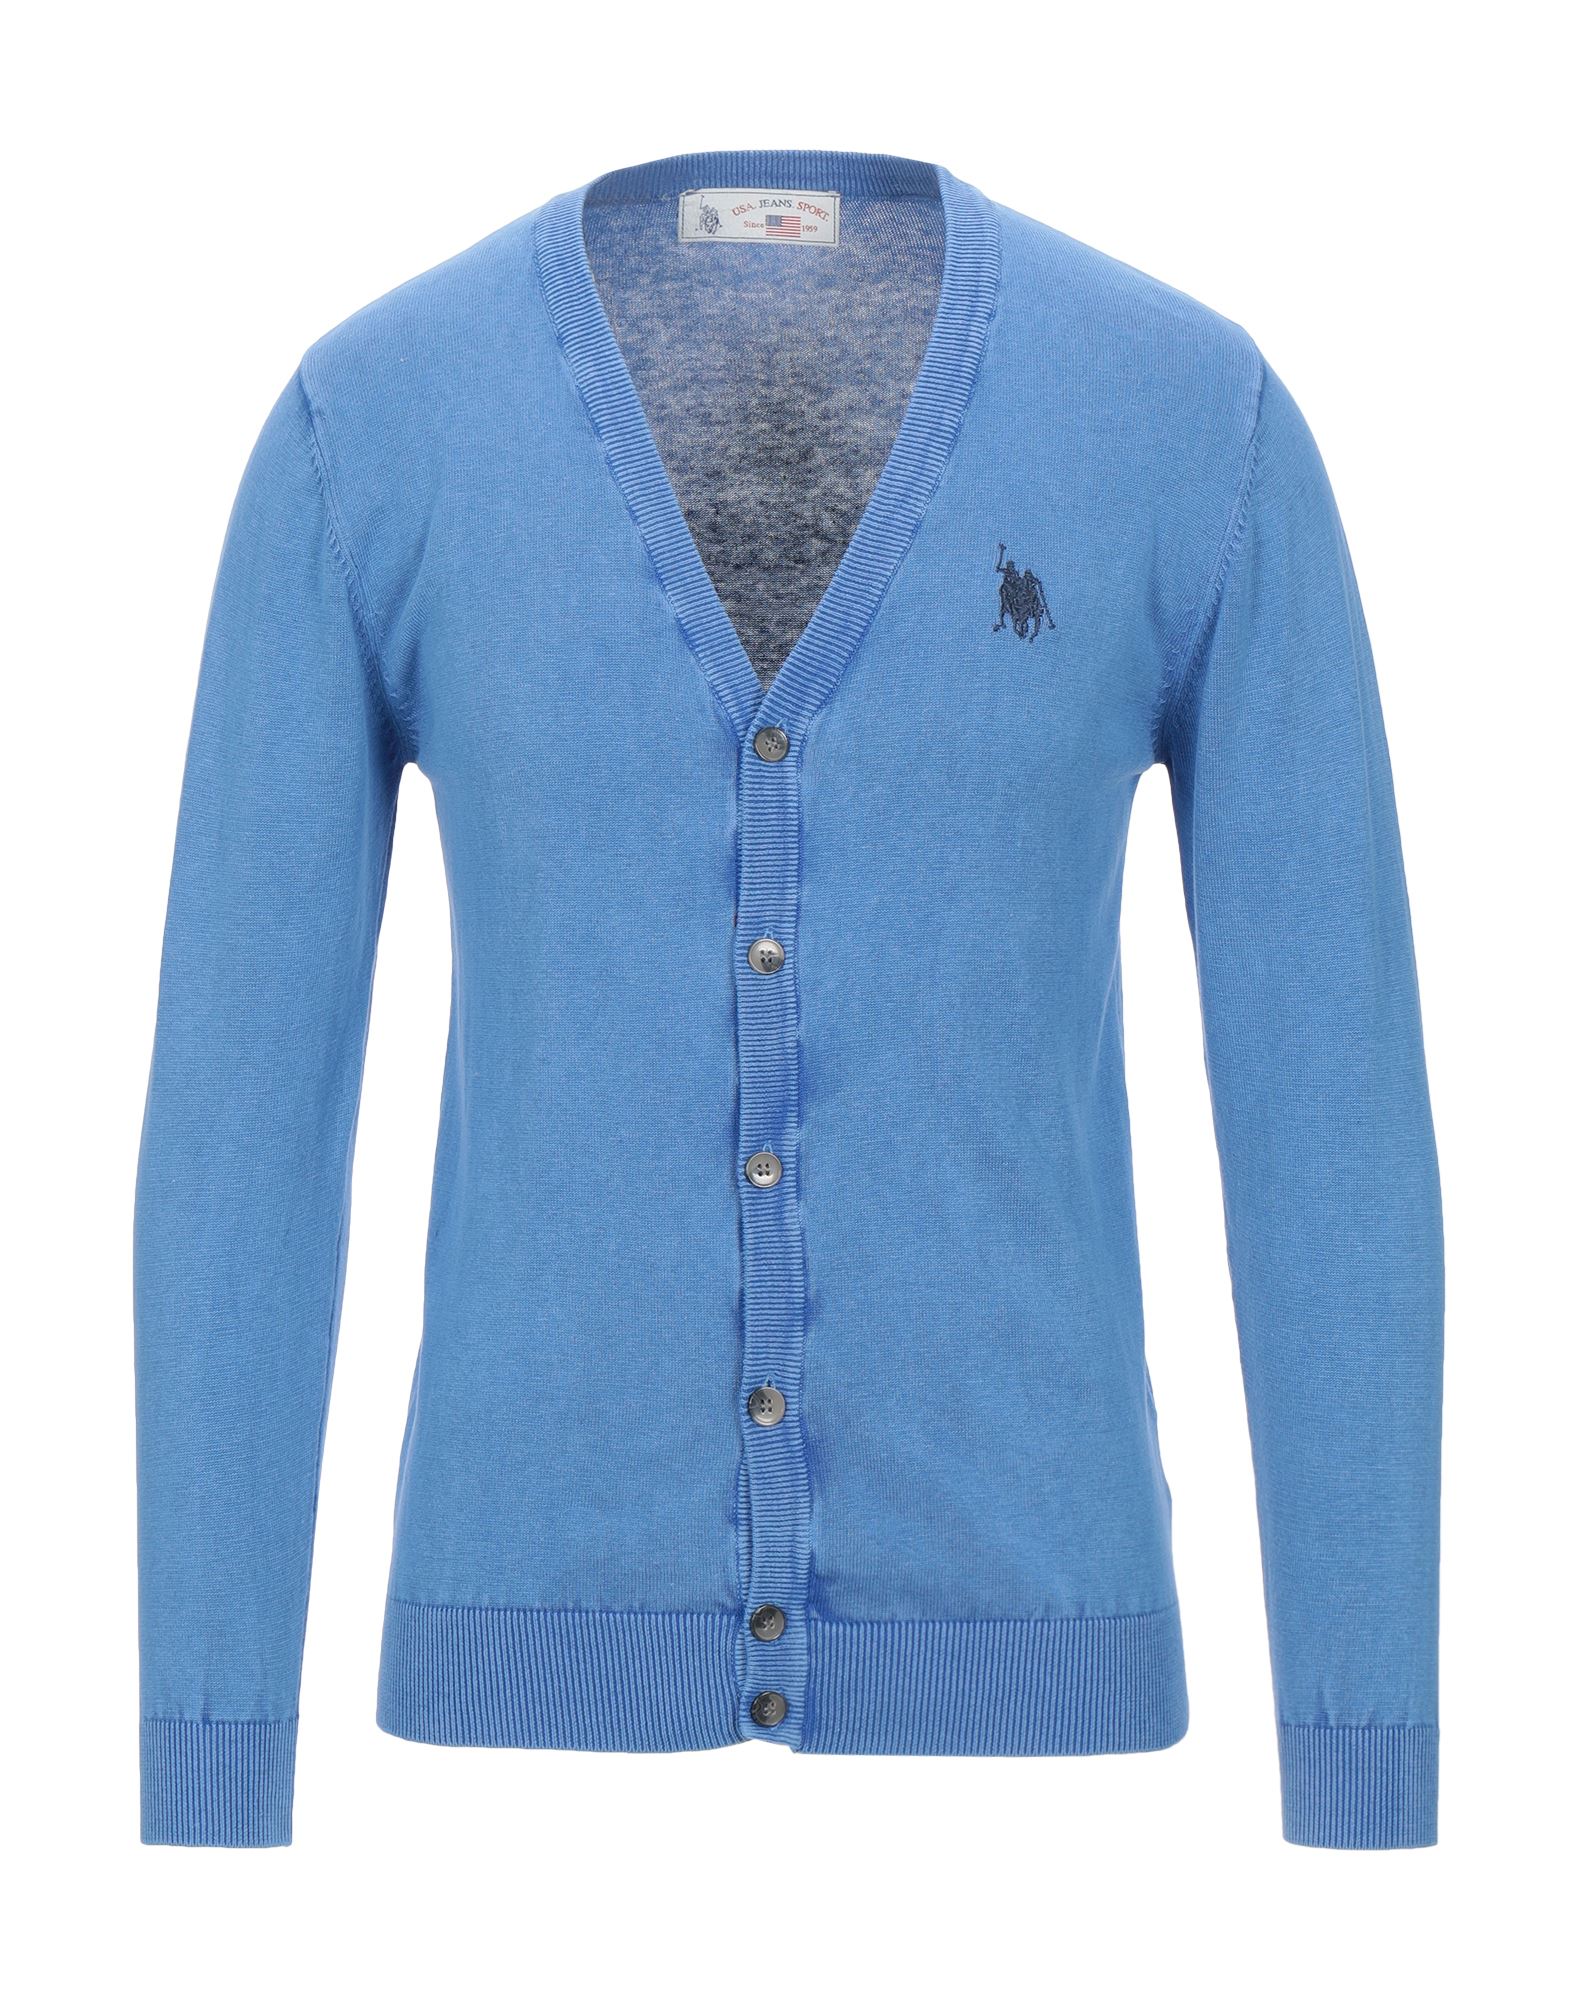 Usa.jeans.sport Usa. Jeans. Sport Cardigans In Blue